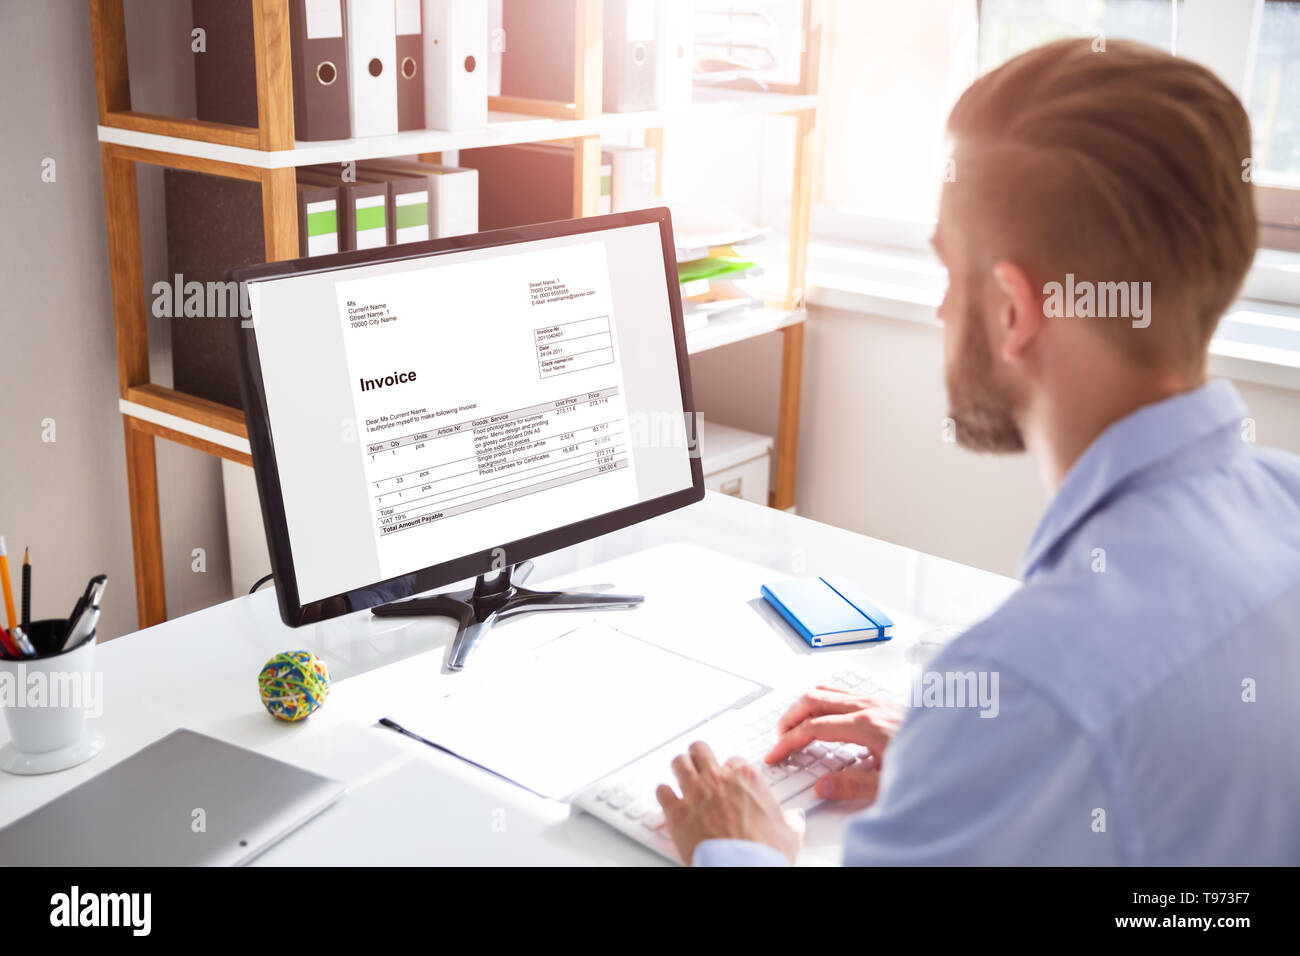 Businessperson Calculating E-Invoice Online On Computer At Office Stock Photo